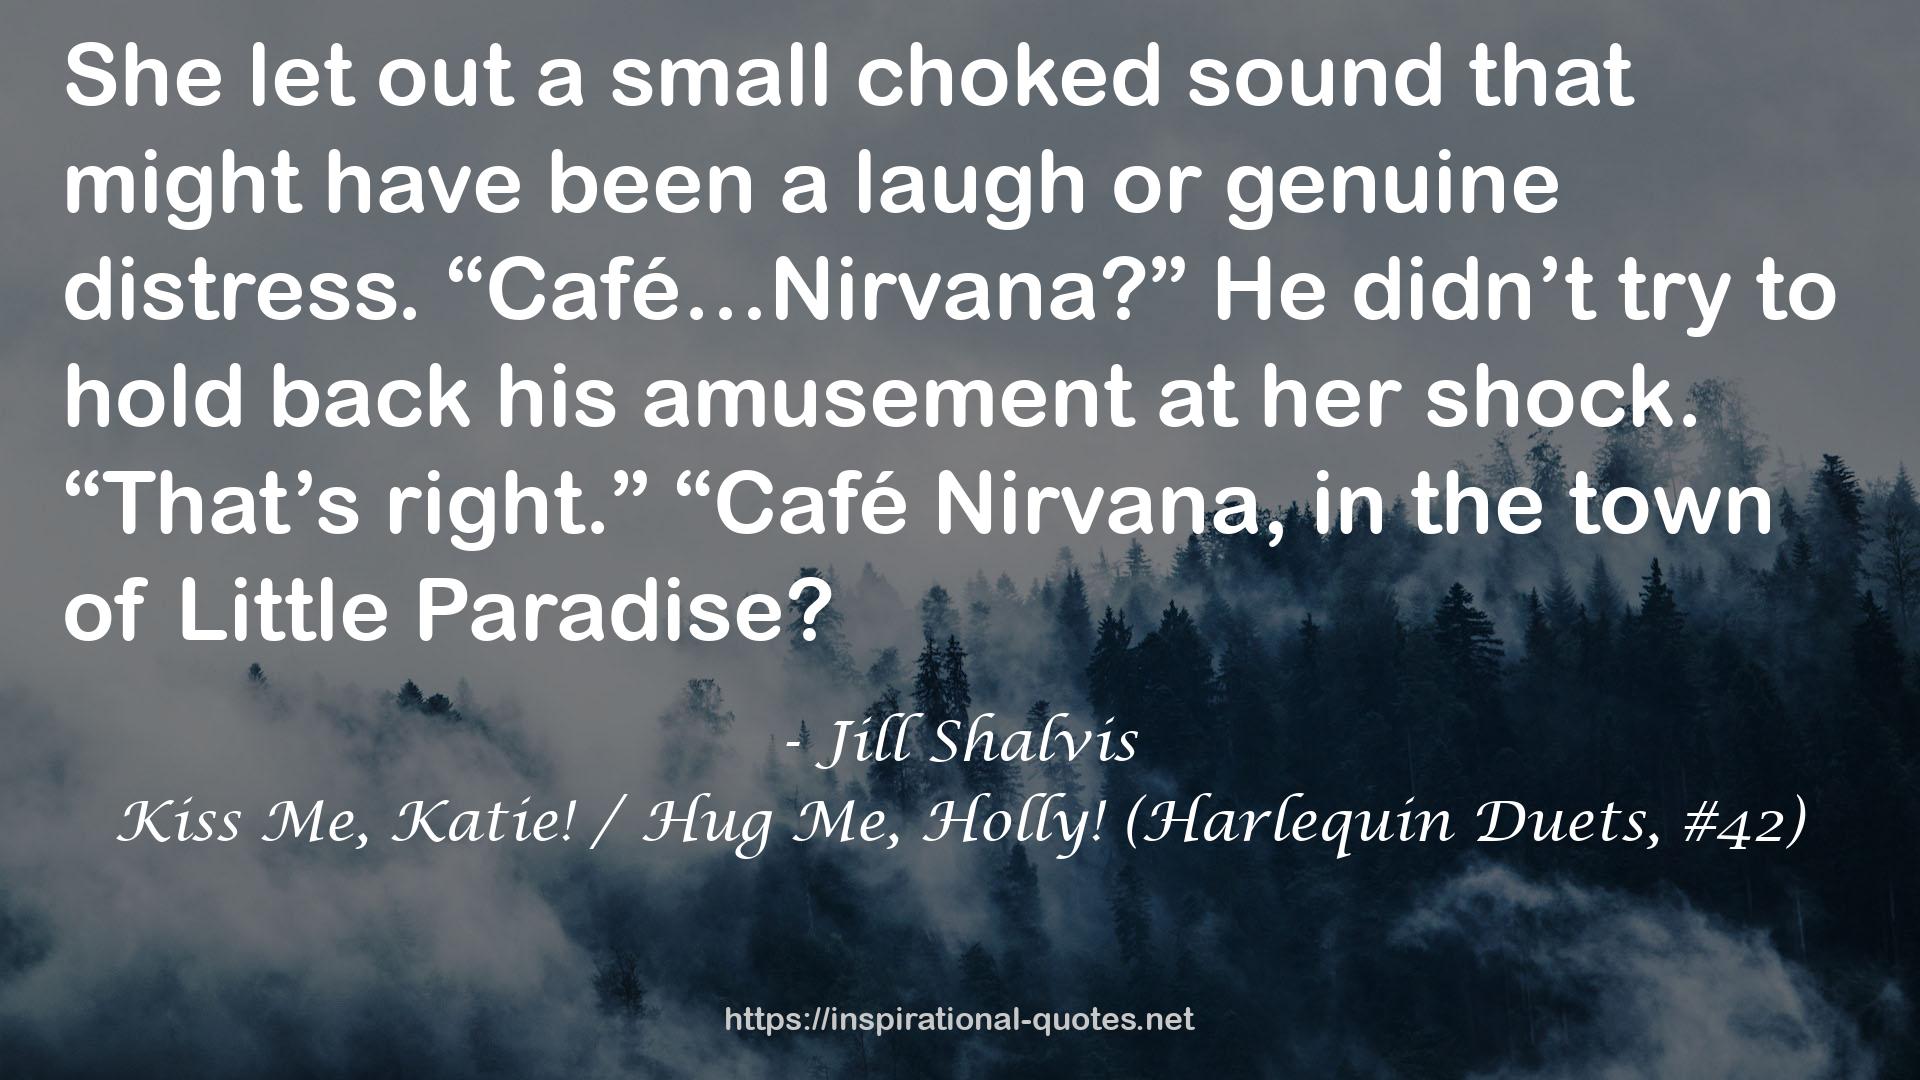 Kiss Me, Katie! / Hug Me, Holly! (Harlequin Duets, #42) QUOTES